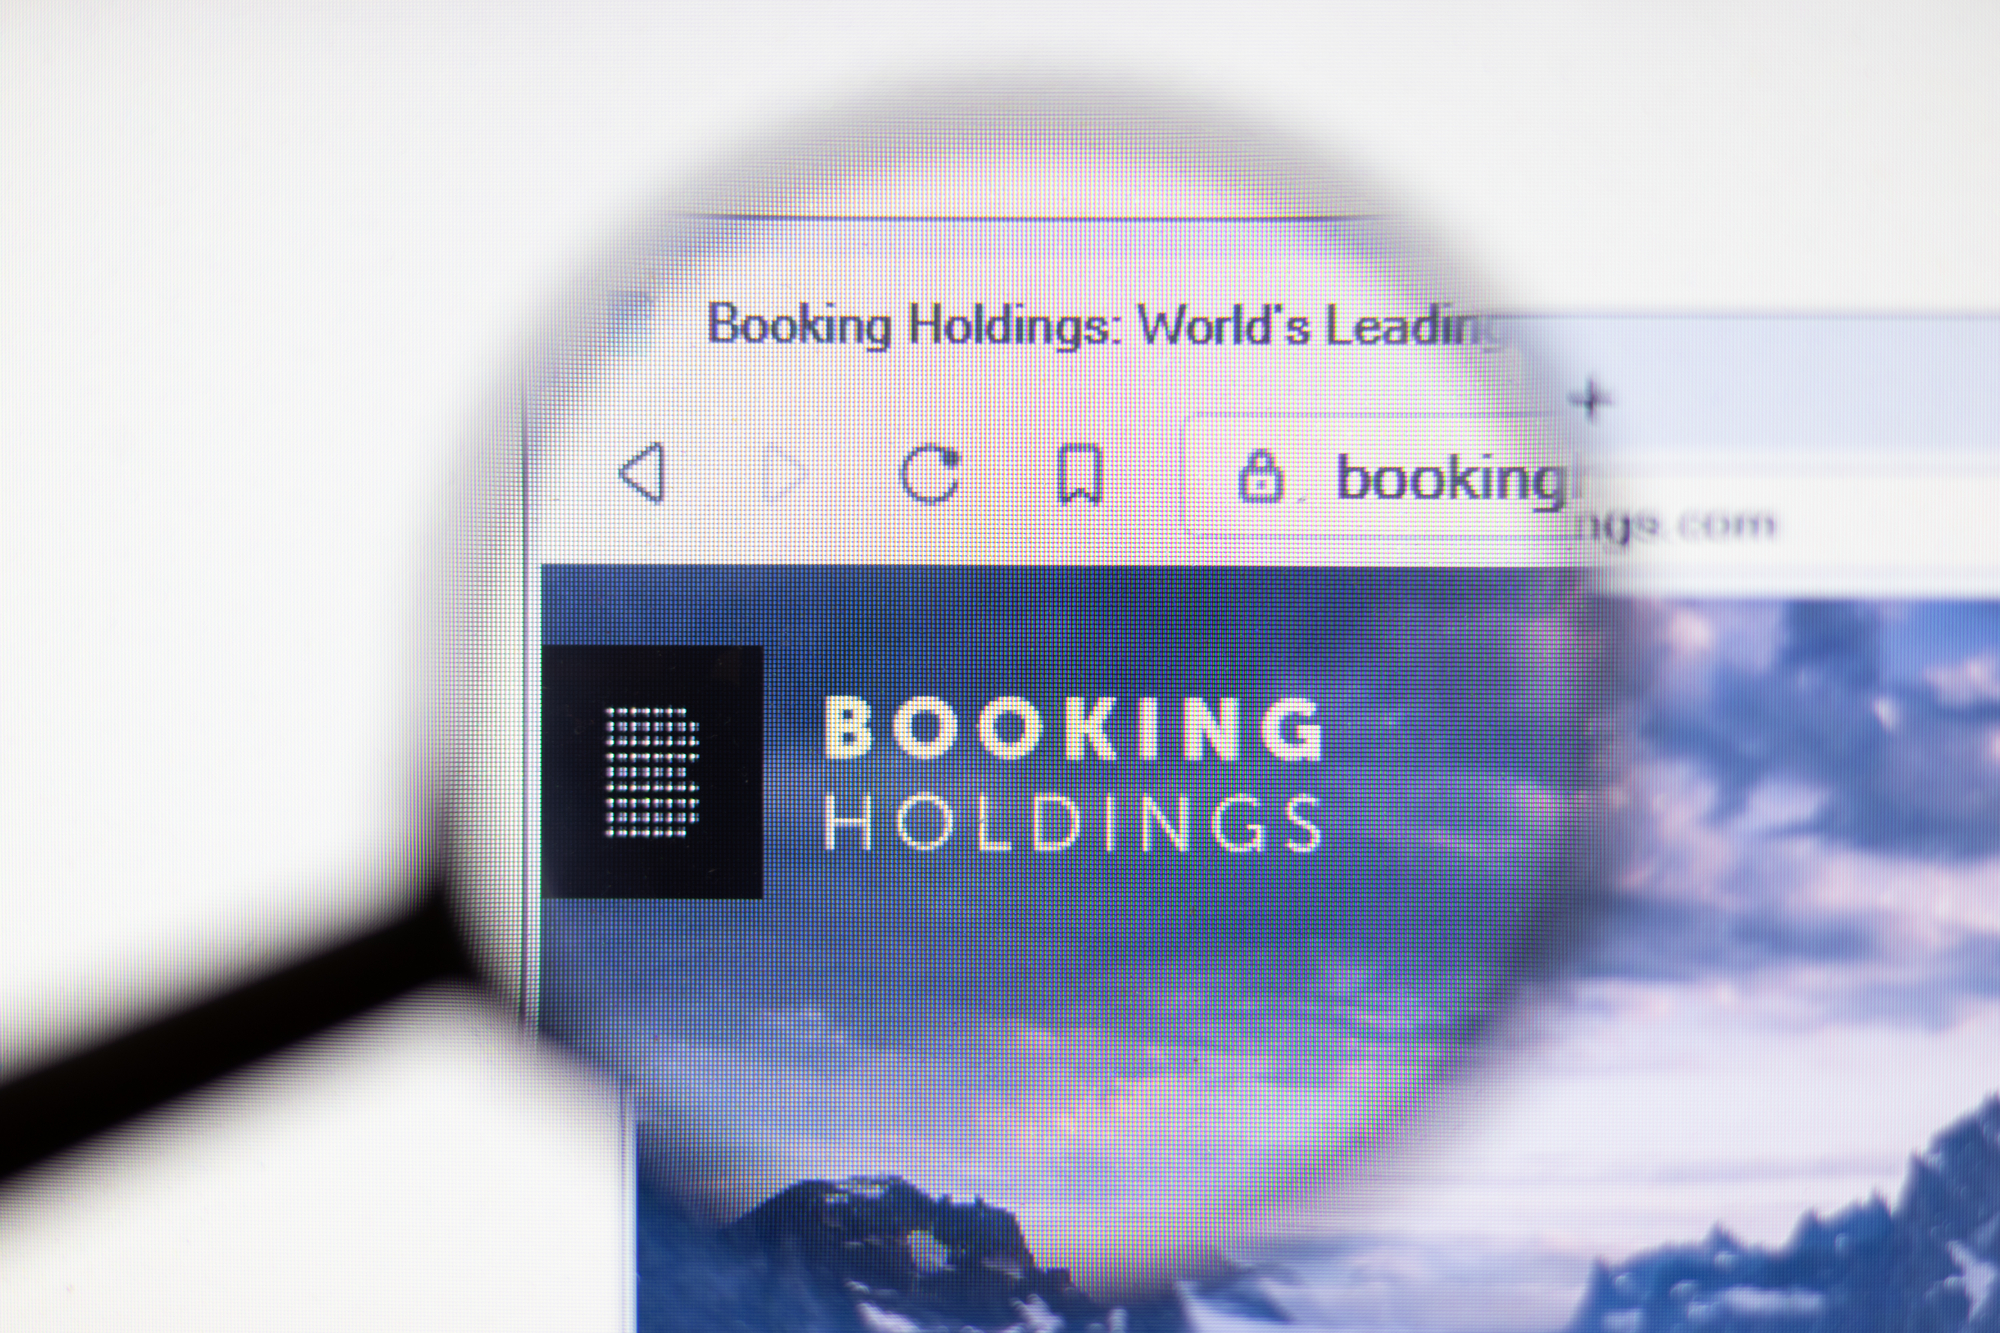 Booking Holdings